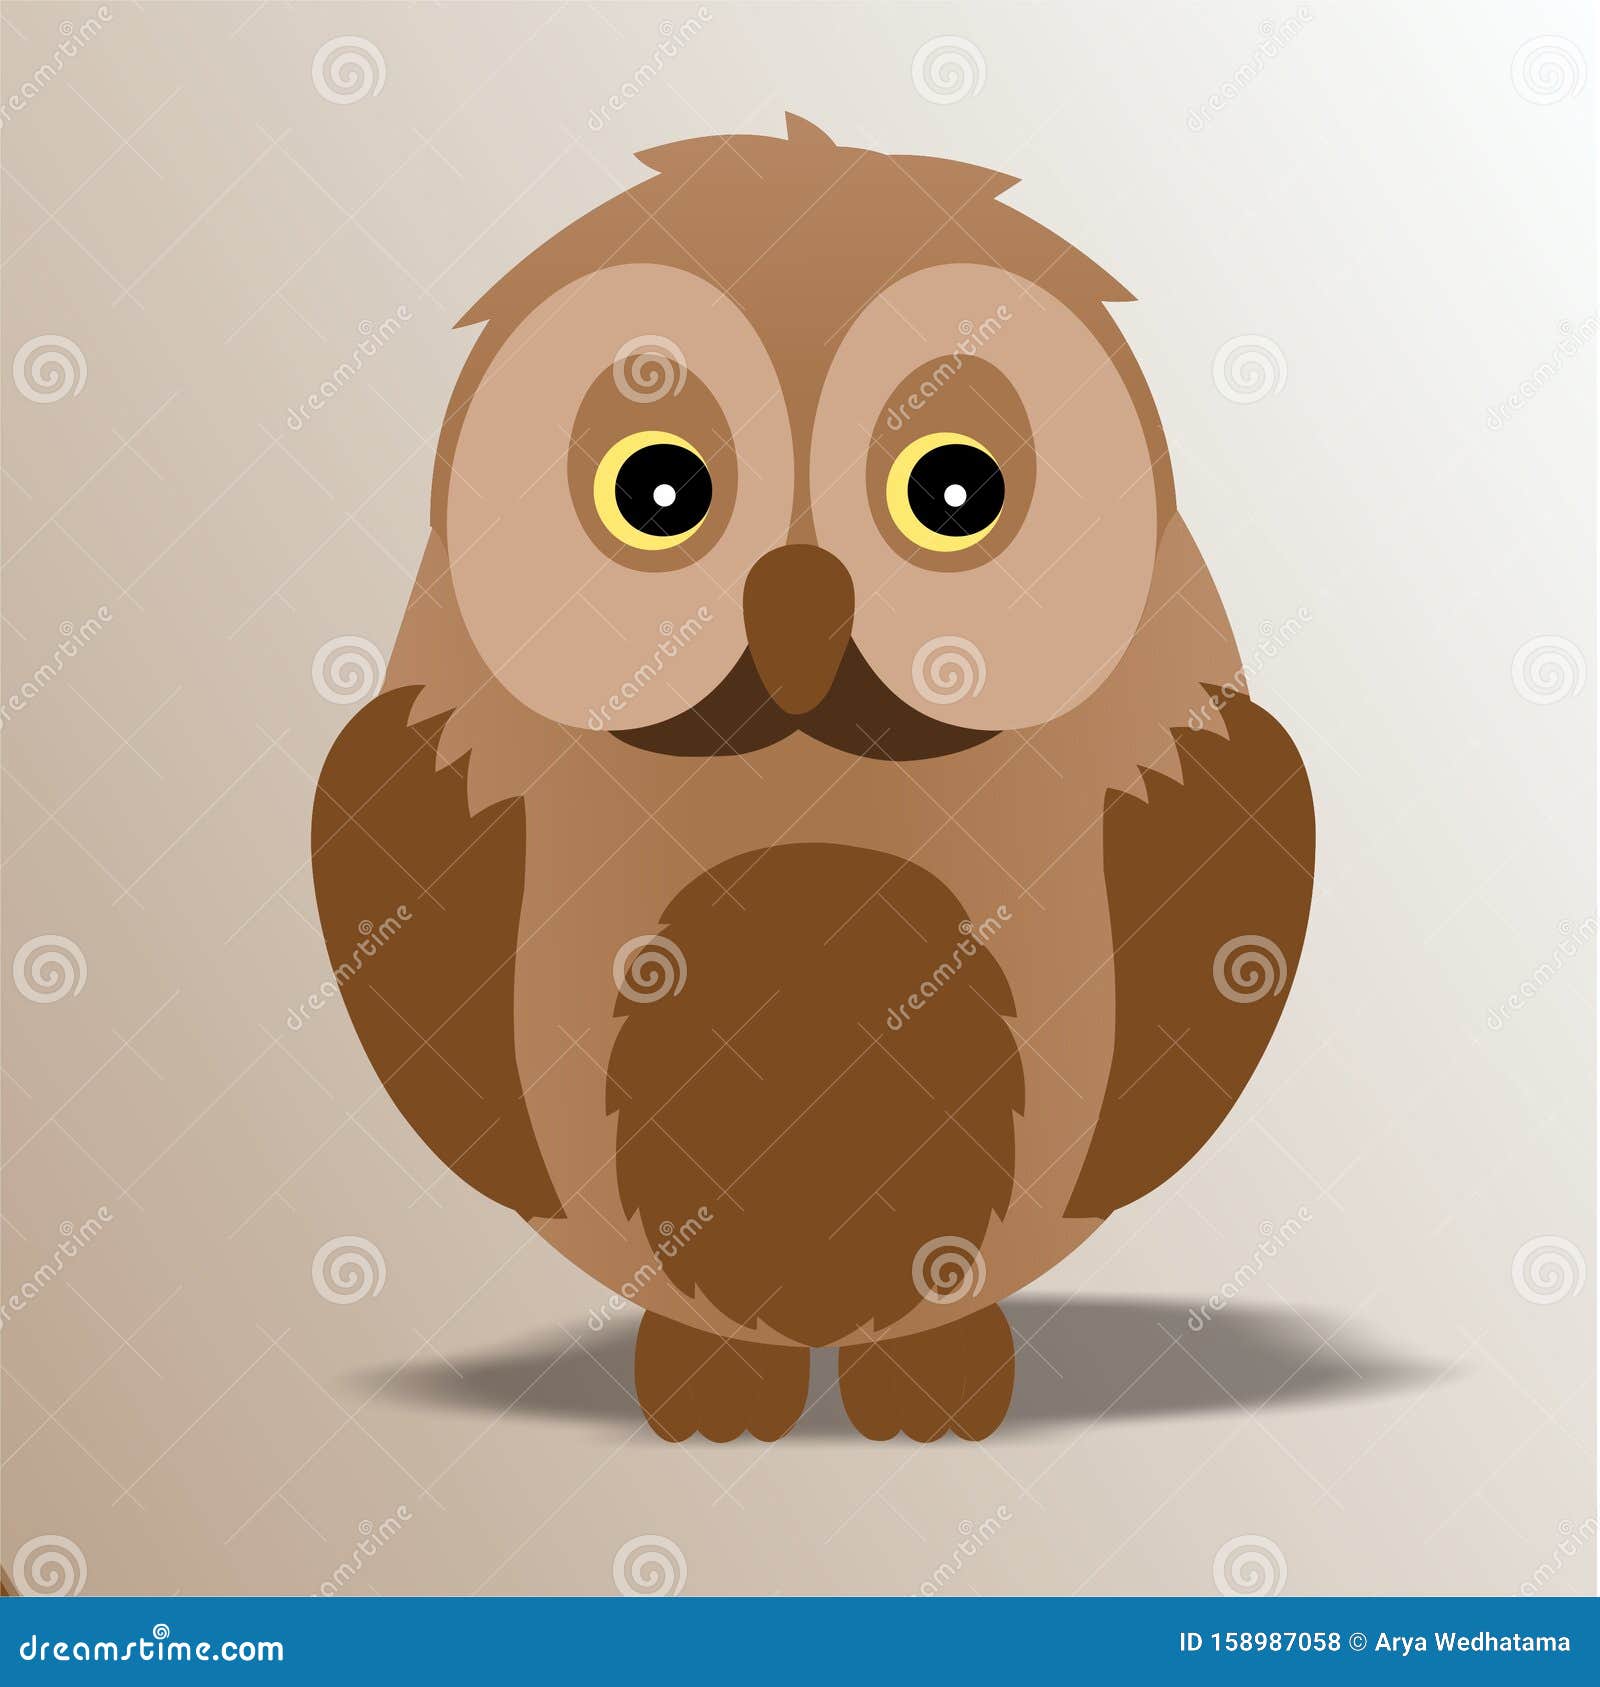 Owl Icon, Cute Cartoon Funny Character with Brown Color â€“ Flat Design  Stock Illustration - Illustration of color, brown: 158987058